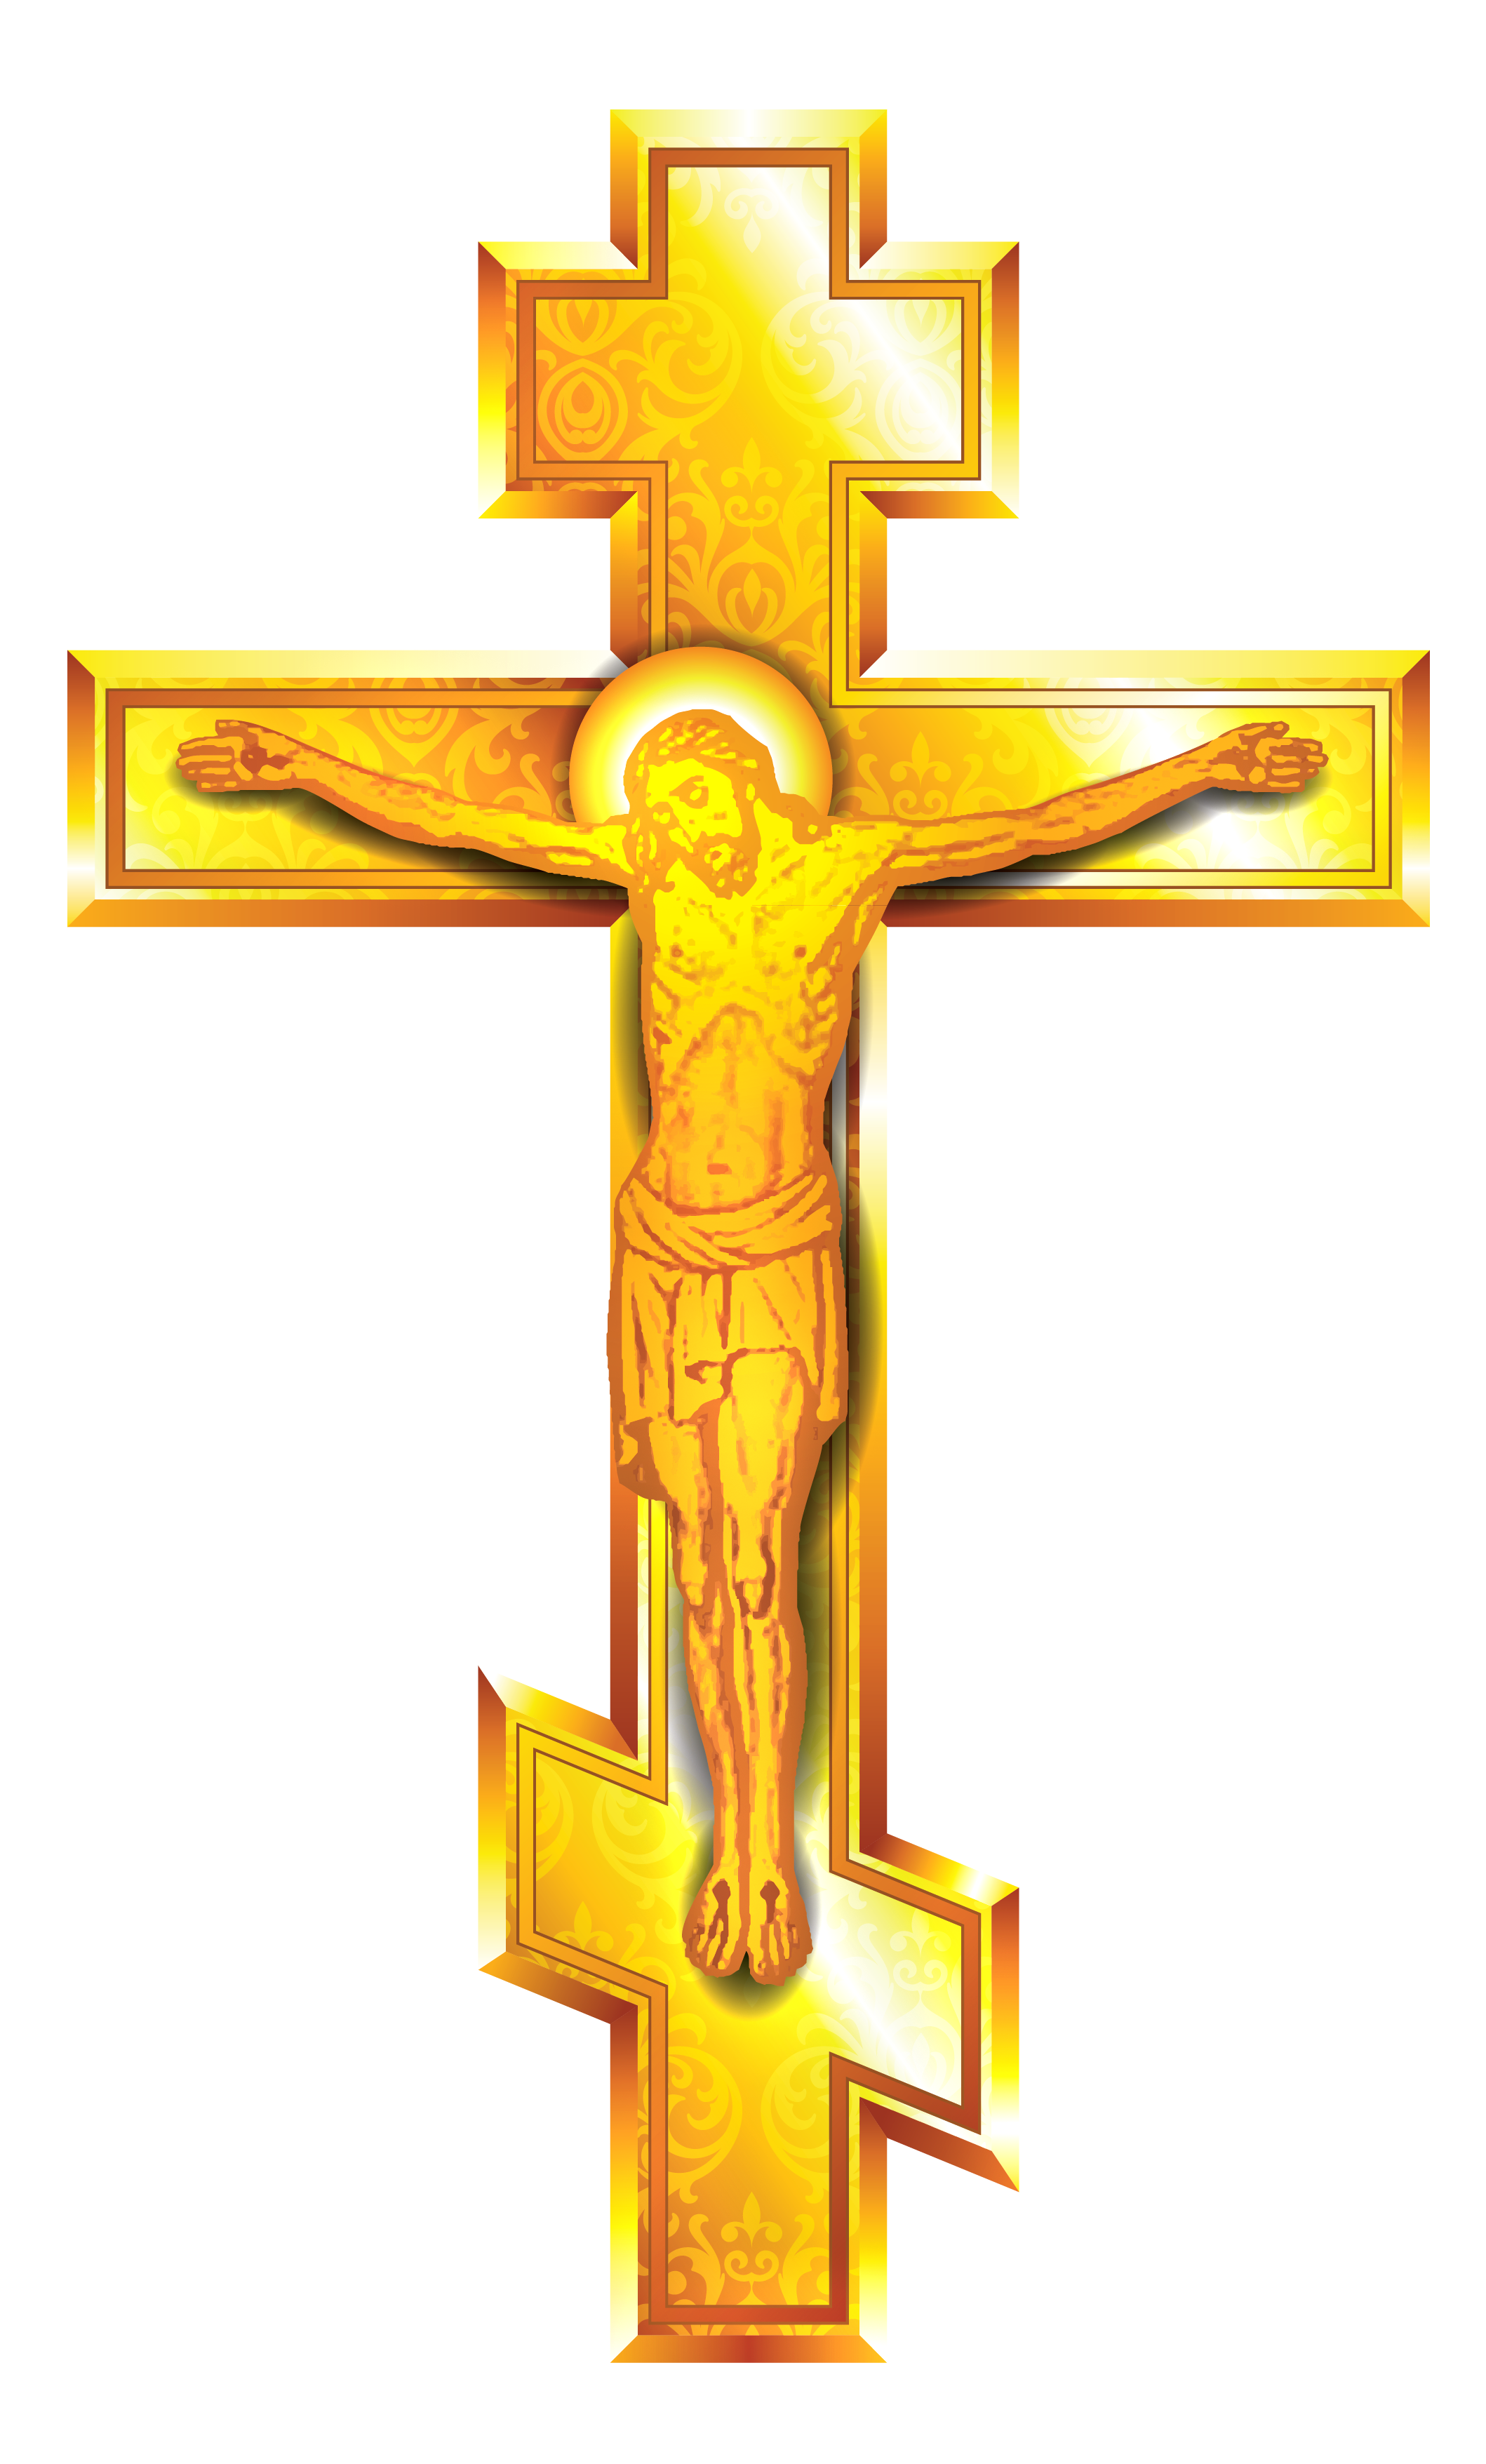 christianity symbol png